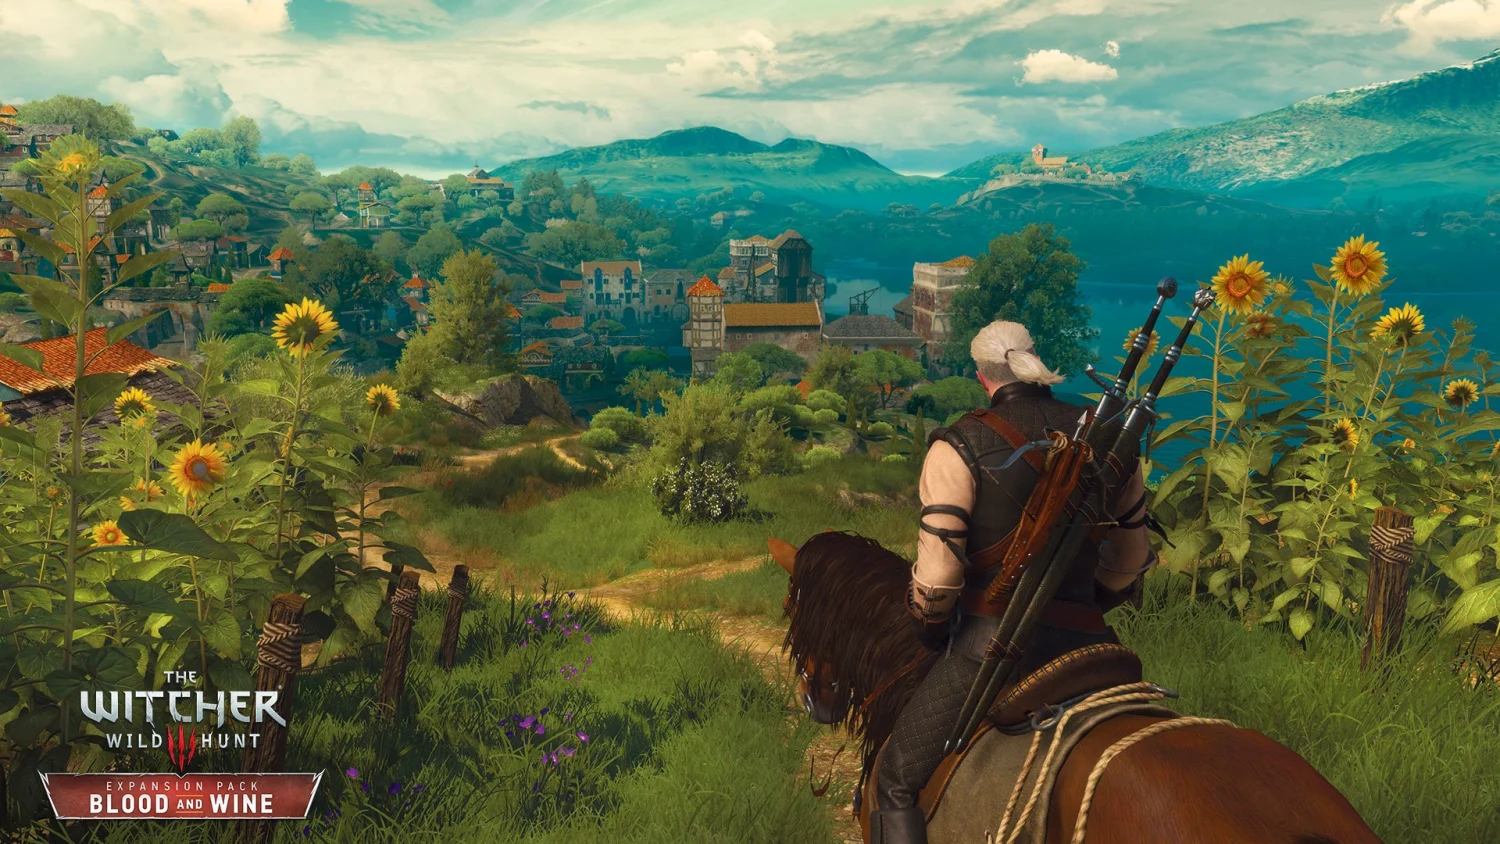 The Witcher 3 Wild Hunt Complete Edition Switch - Físico